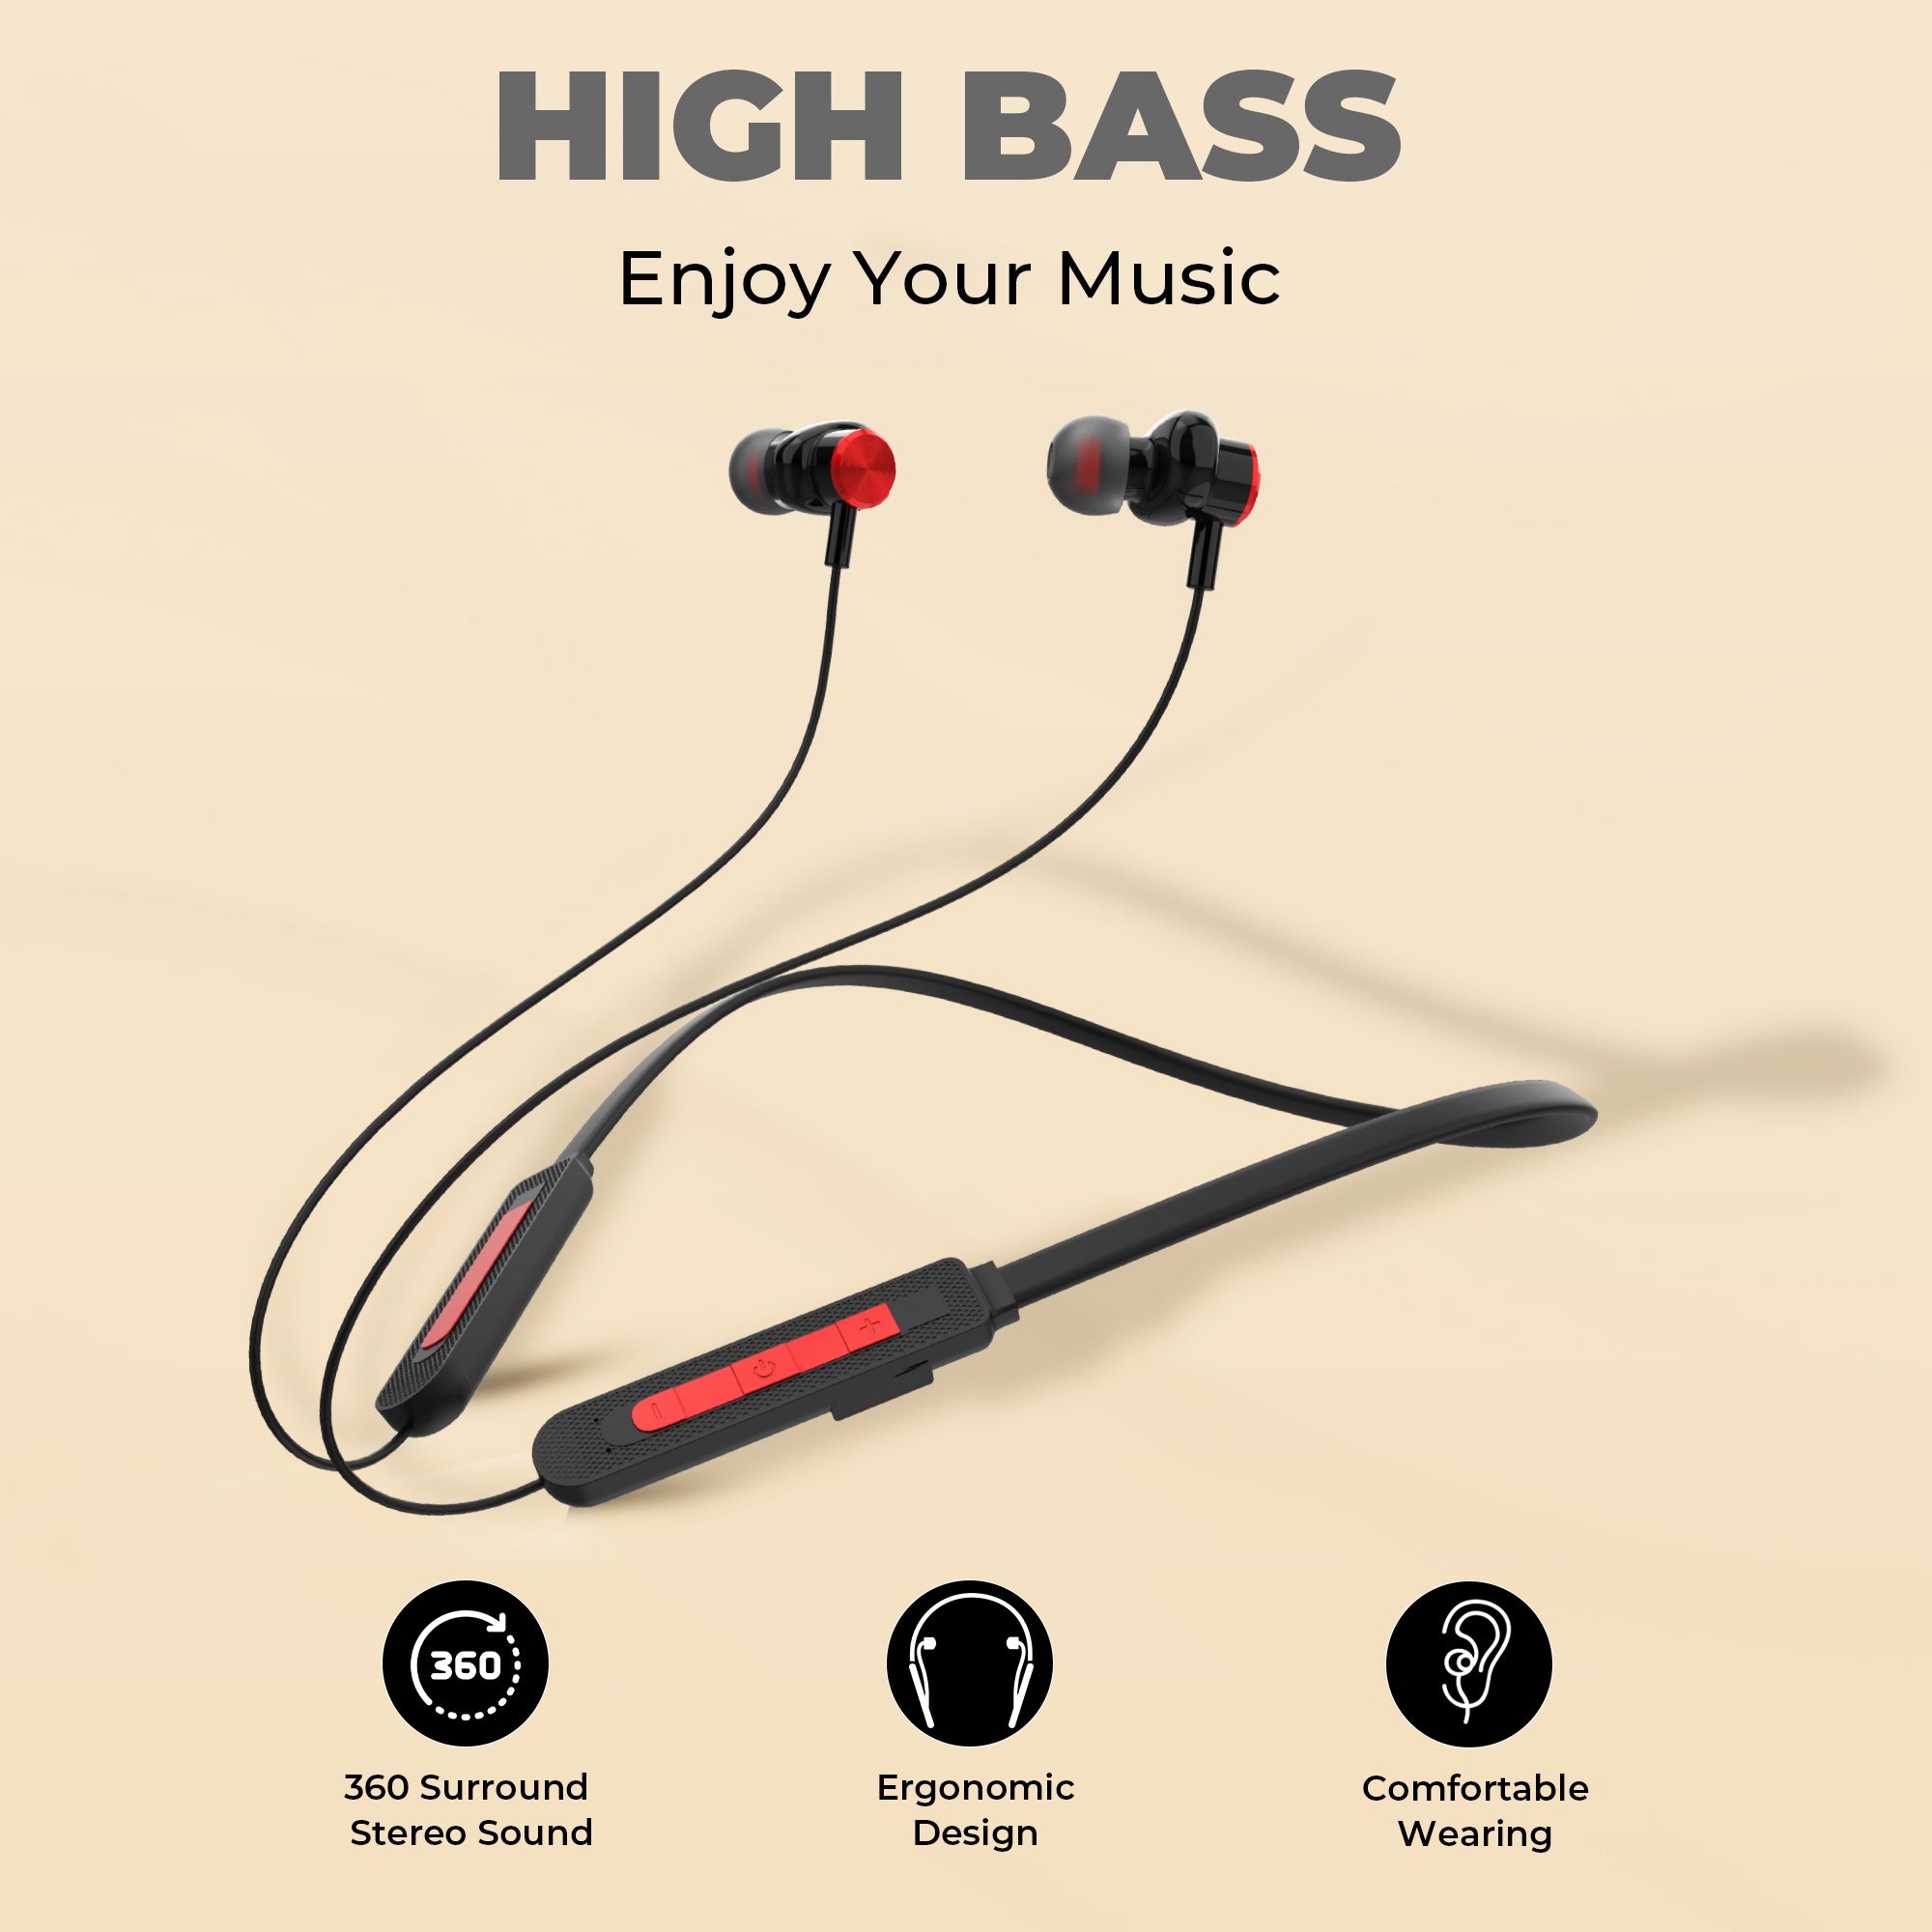 GIZMORE MN218 Melody Bluetooth Wireless 5.0 in Ear Neckband Earphone with mic, Up to 18 HRS Playtime, Dual Pairing, Hi-Fi Stereo Sound, Multiple Controls, and Lightweight